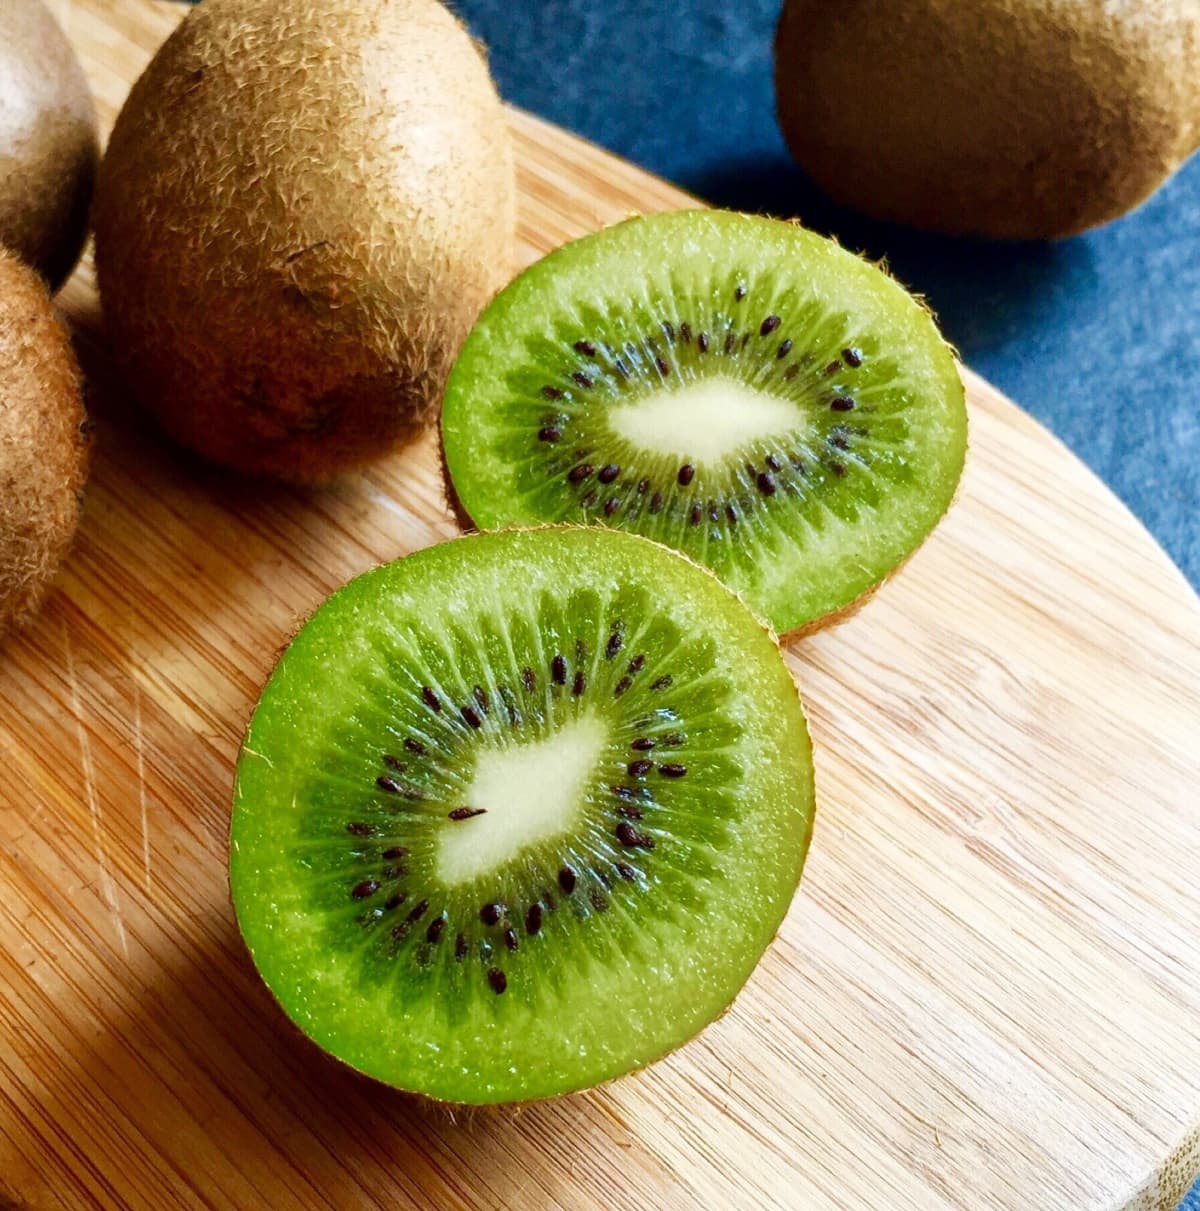 Kiwi slices in the bowl. On black wooden background